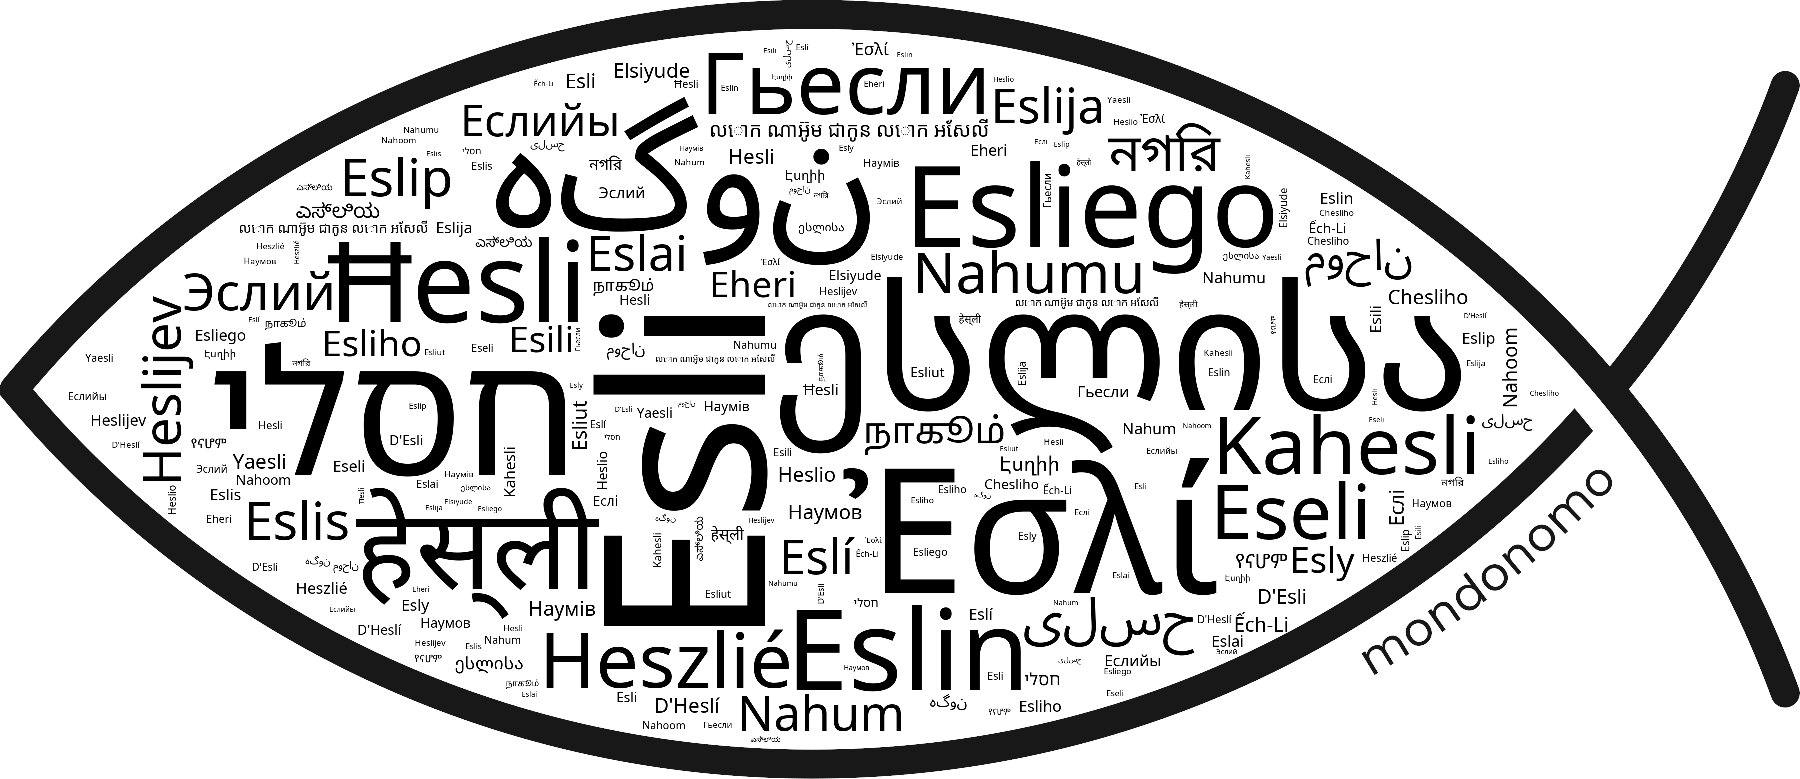 Name Esli in the world's Bibles